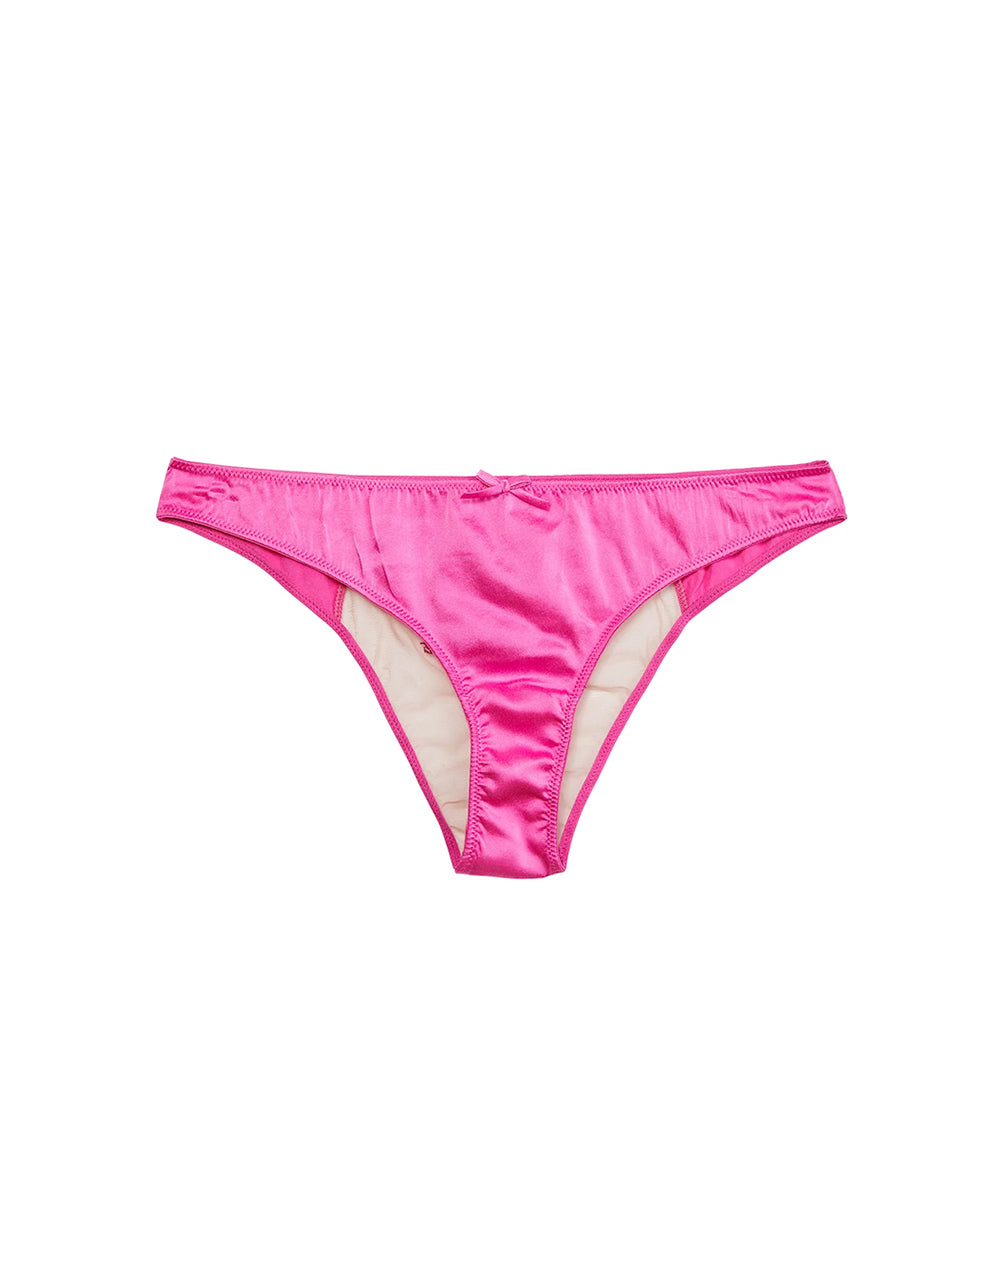 Let's Make Love Cheeky - Some Like it Hot Pink